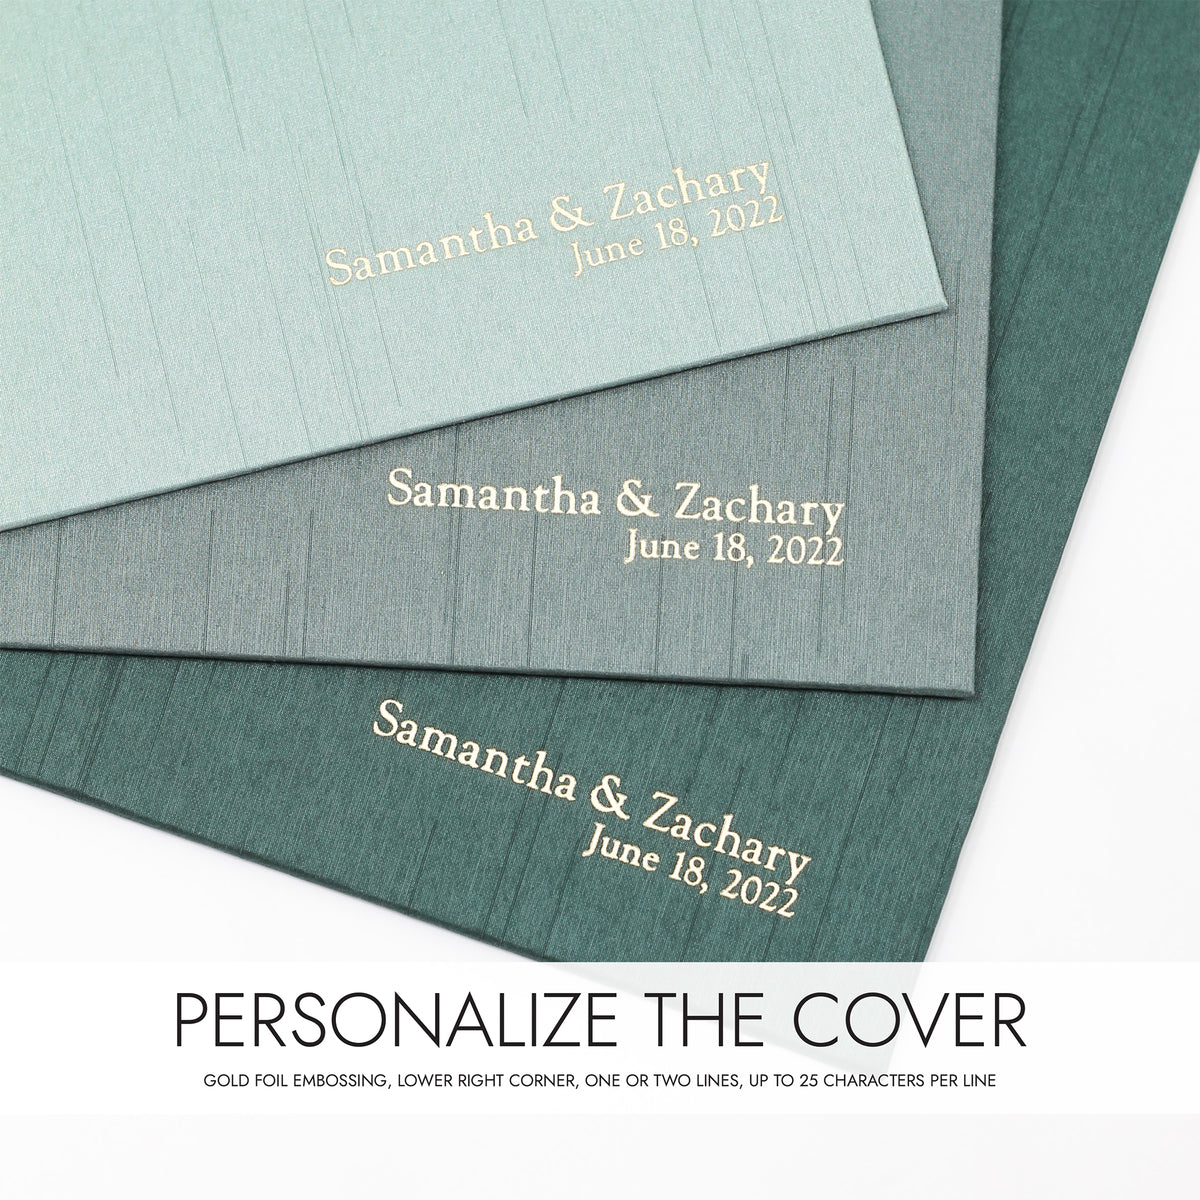 Photo Binder for 5x7 photos | Cover: Emerald Silk | Available Personalized